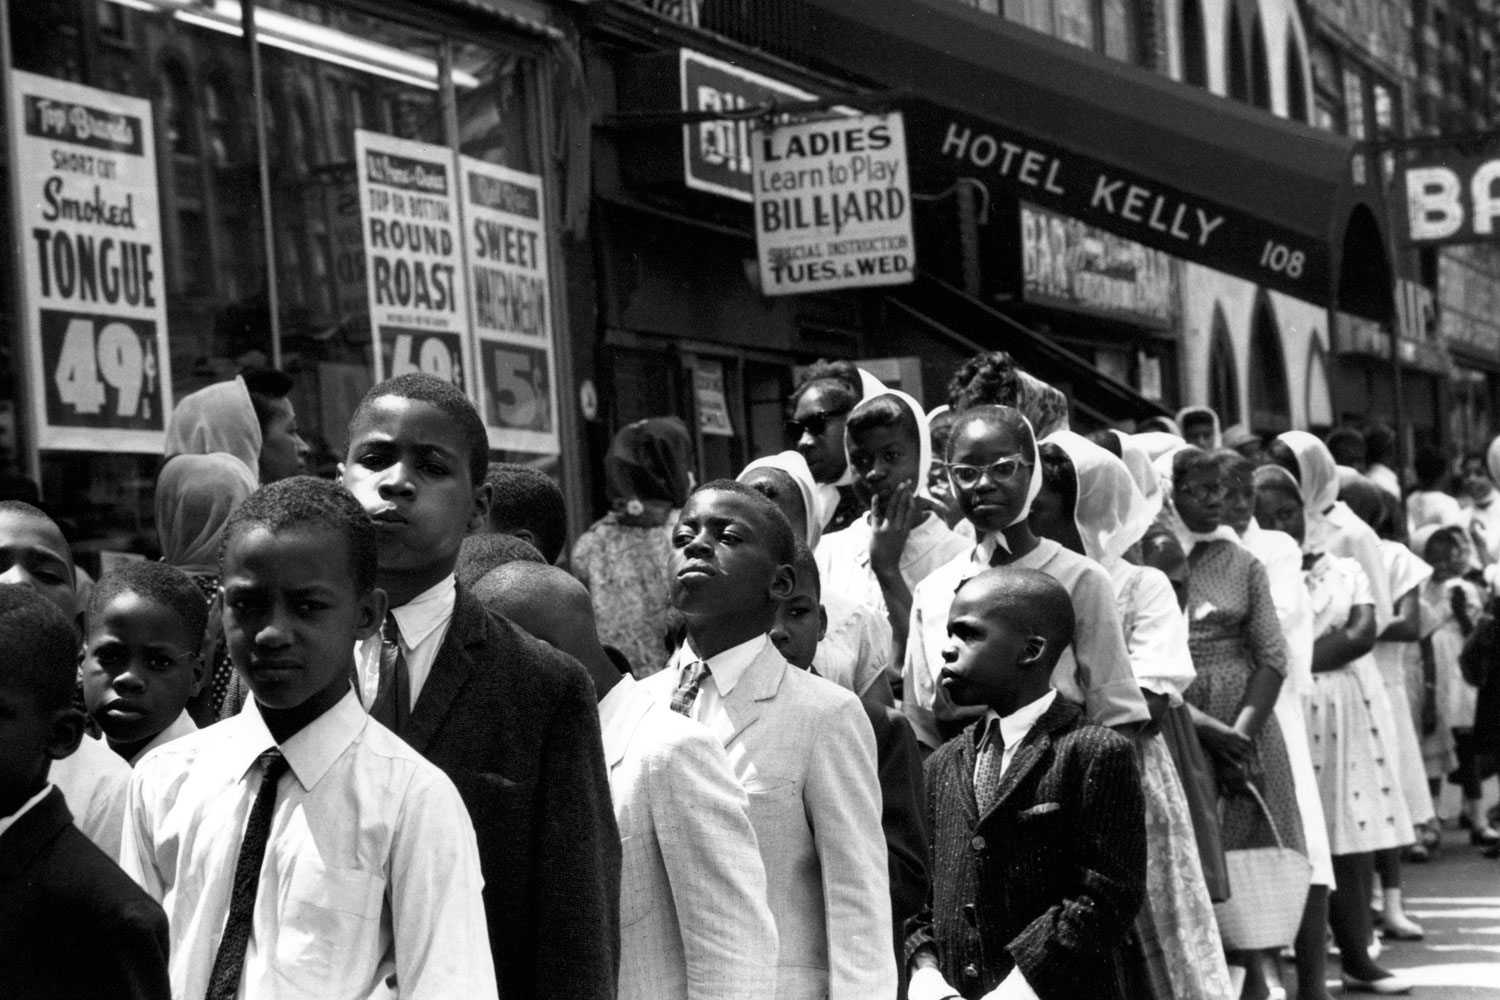 Children line up outside a Nation of Islam meeting at the Uline Arena, Washington, D.C., 1961.